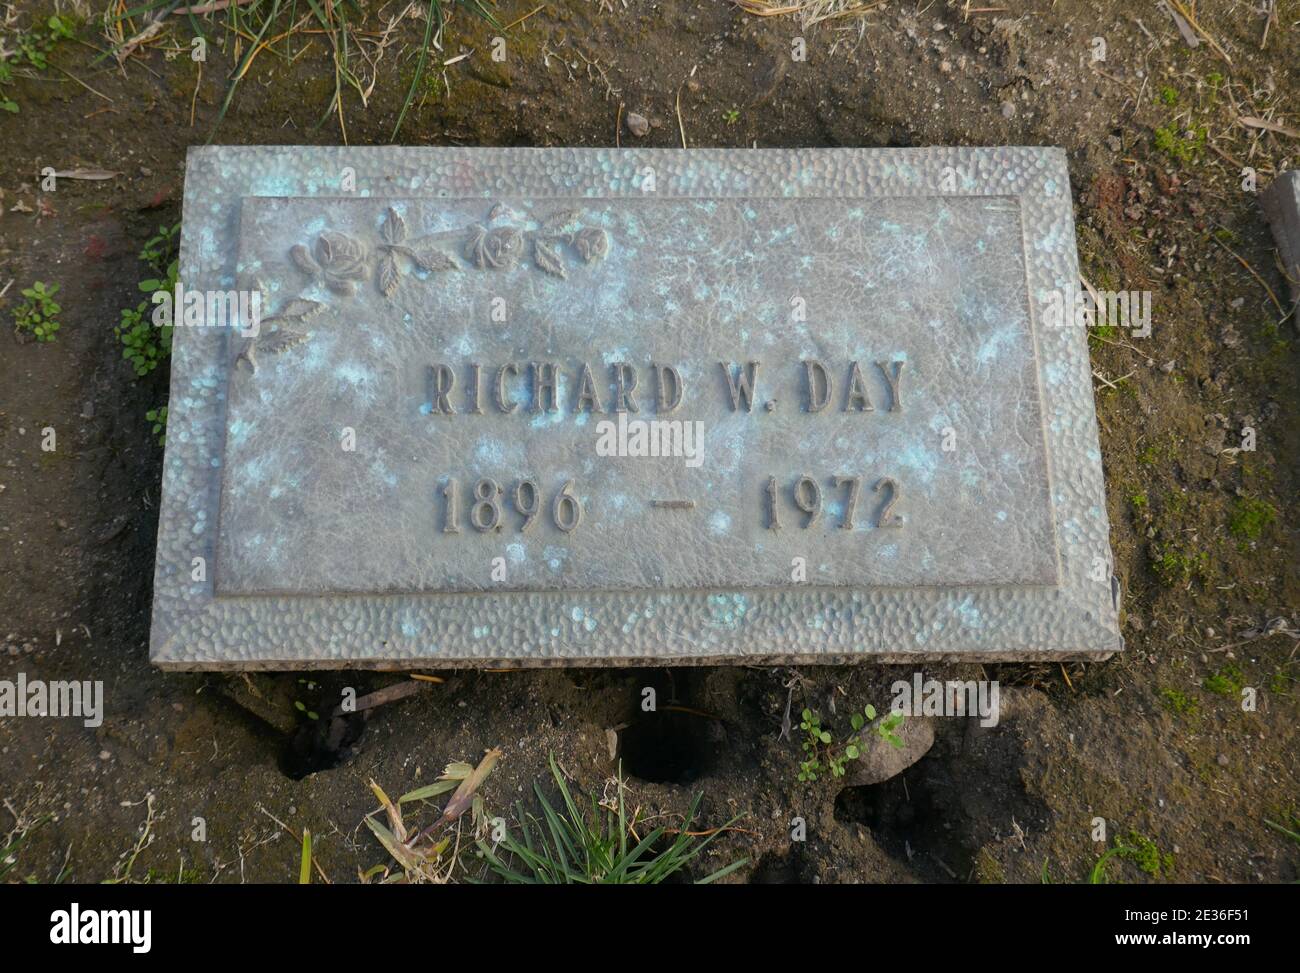 North Hollywood, California, USA 15th January 2021 A general view of atmosphere of set designer/art director Richard Day's Grave at Valhalla Memorial Park Cemetery on January 15, 2021 in North Hollywood, California, USA. Photo by Barry King/Alamy Stock Photo Stock Photo